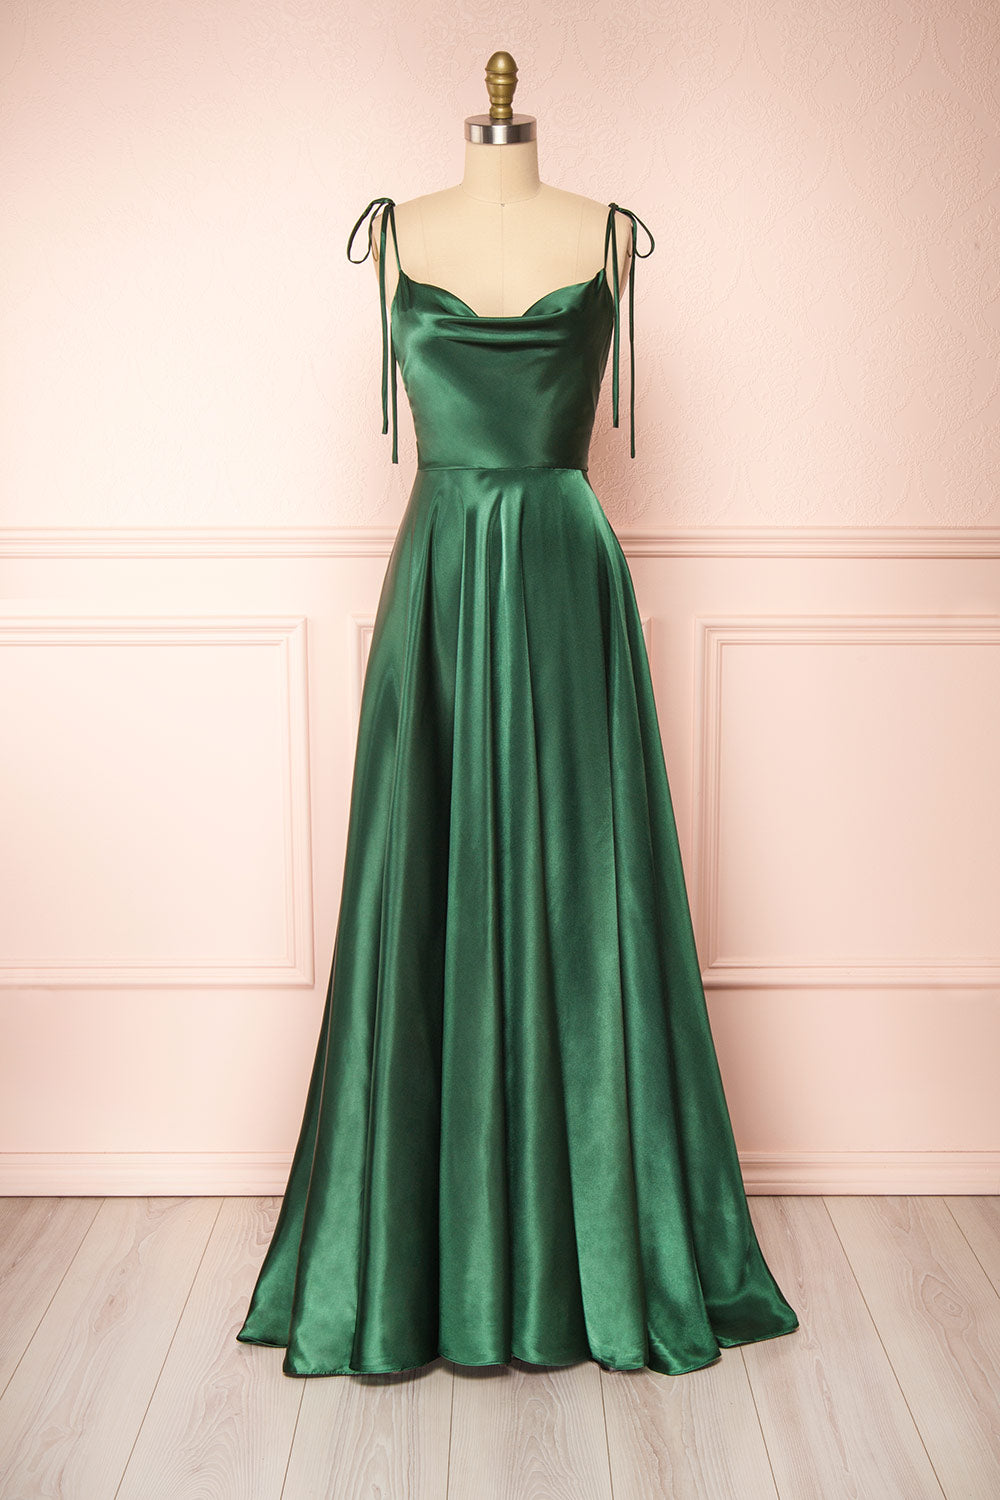 Hunter Green Maxi Dress with Long Sleeves | Formal dresses with sleeves, Green  long sleeve dress, Bridesmaid dresses with sleeves